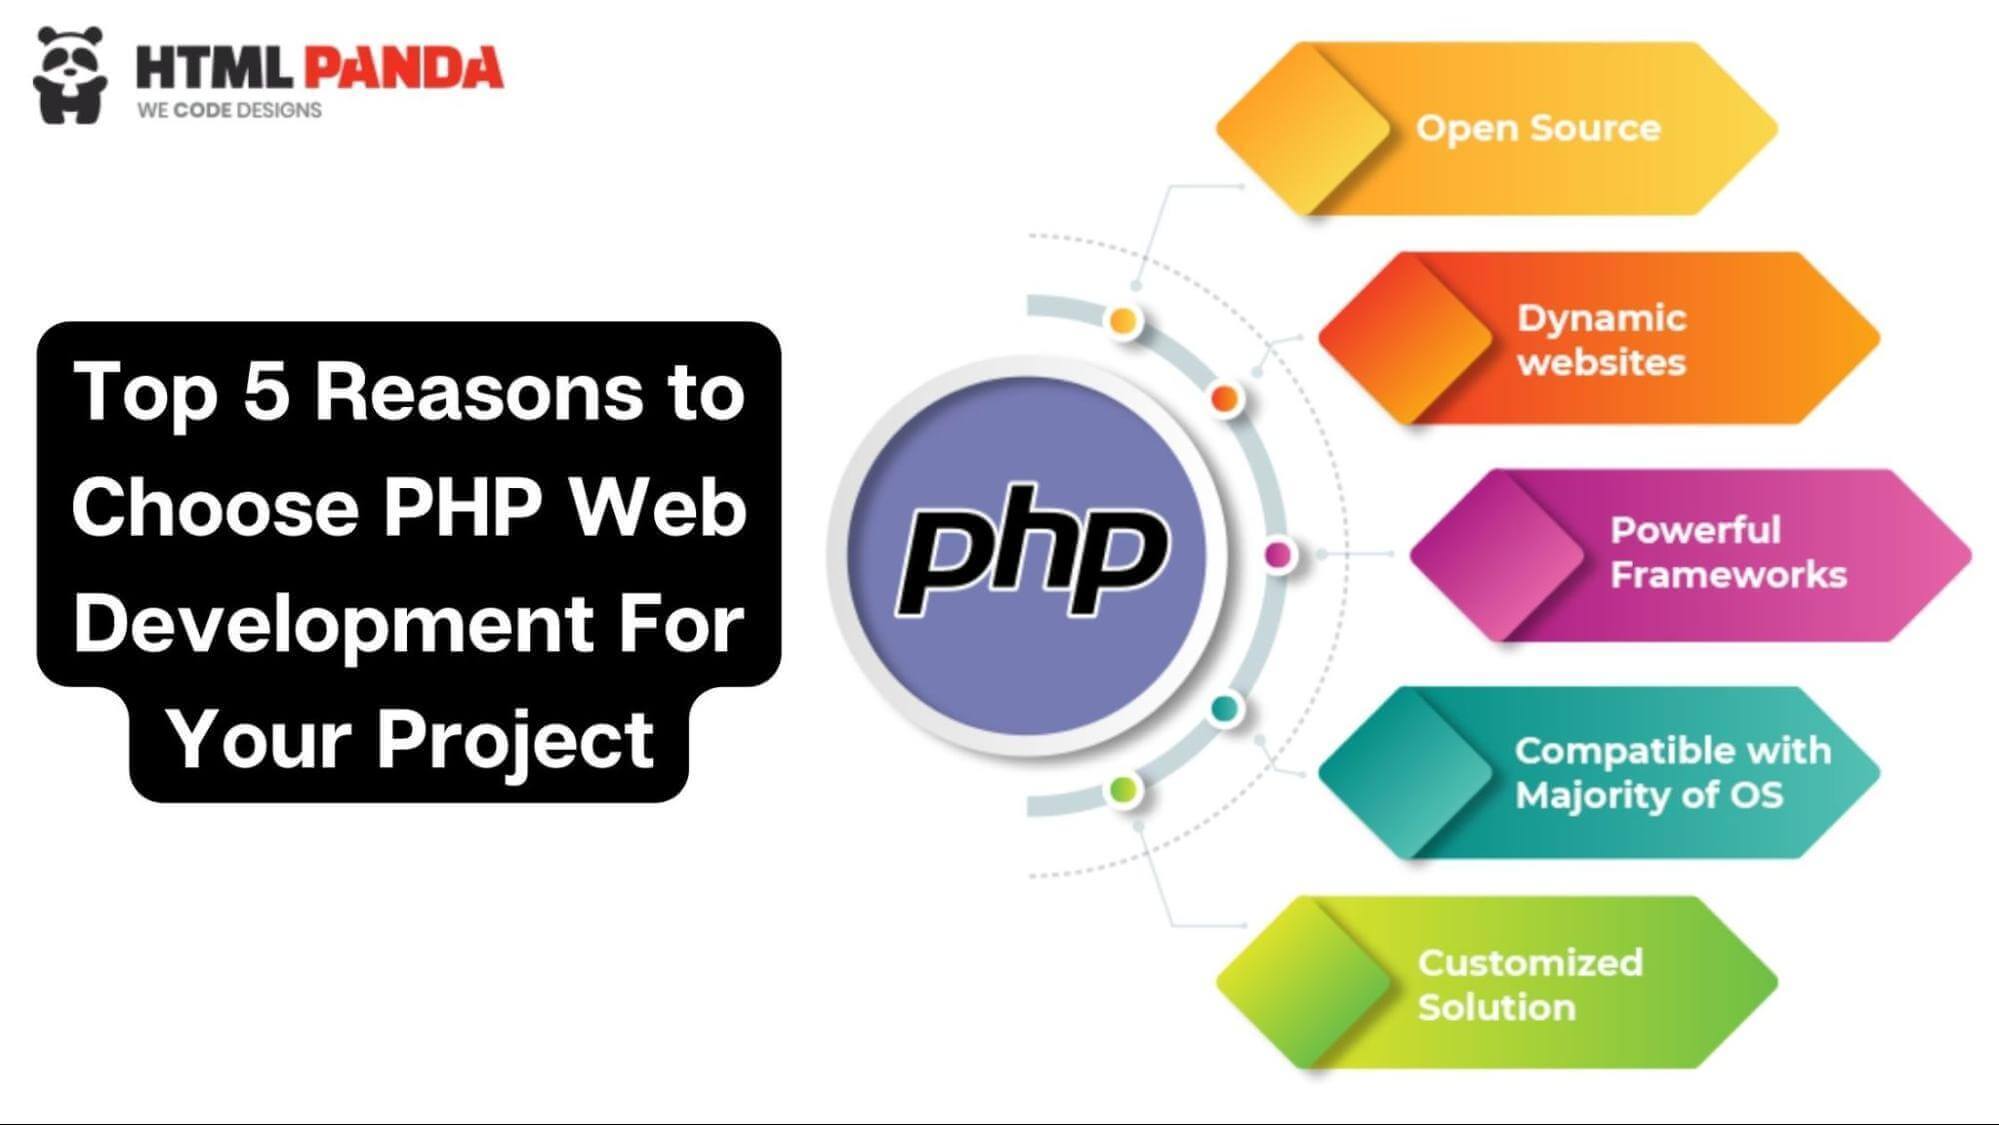 Top 5 Reasons to Choose PHP Web Development For Your Project